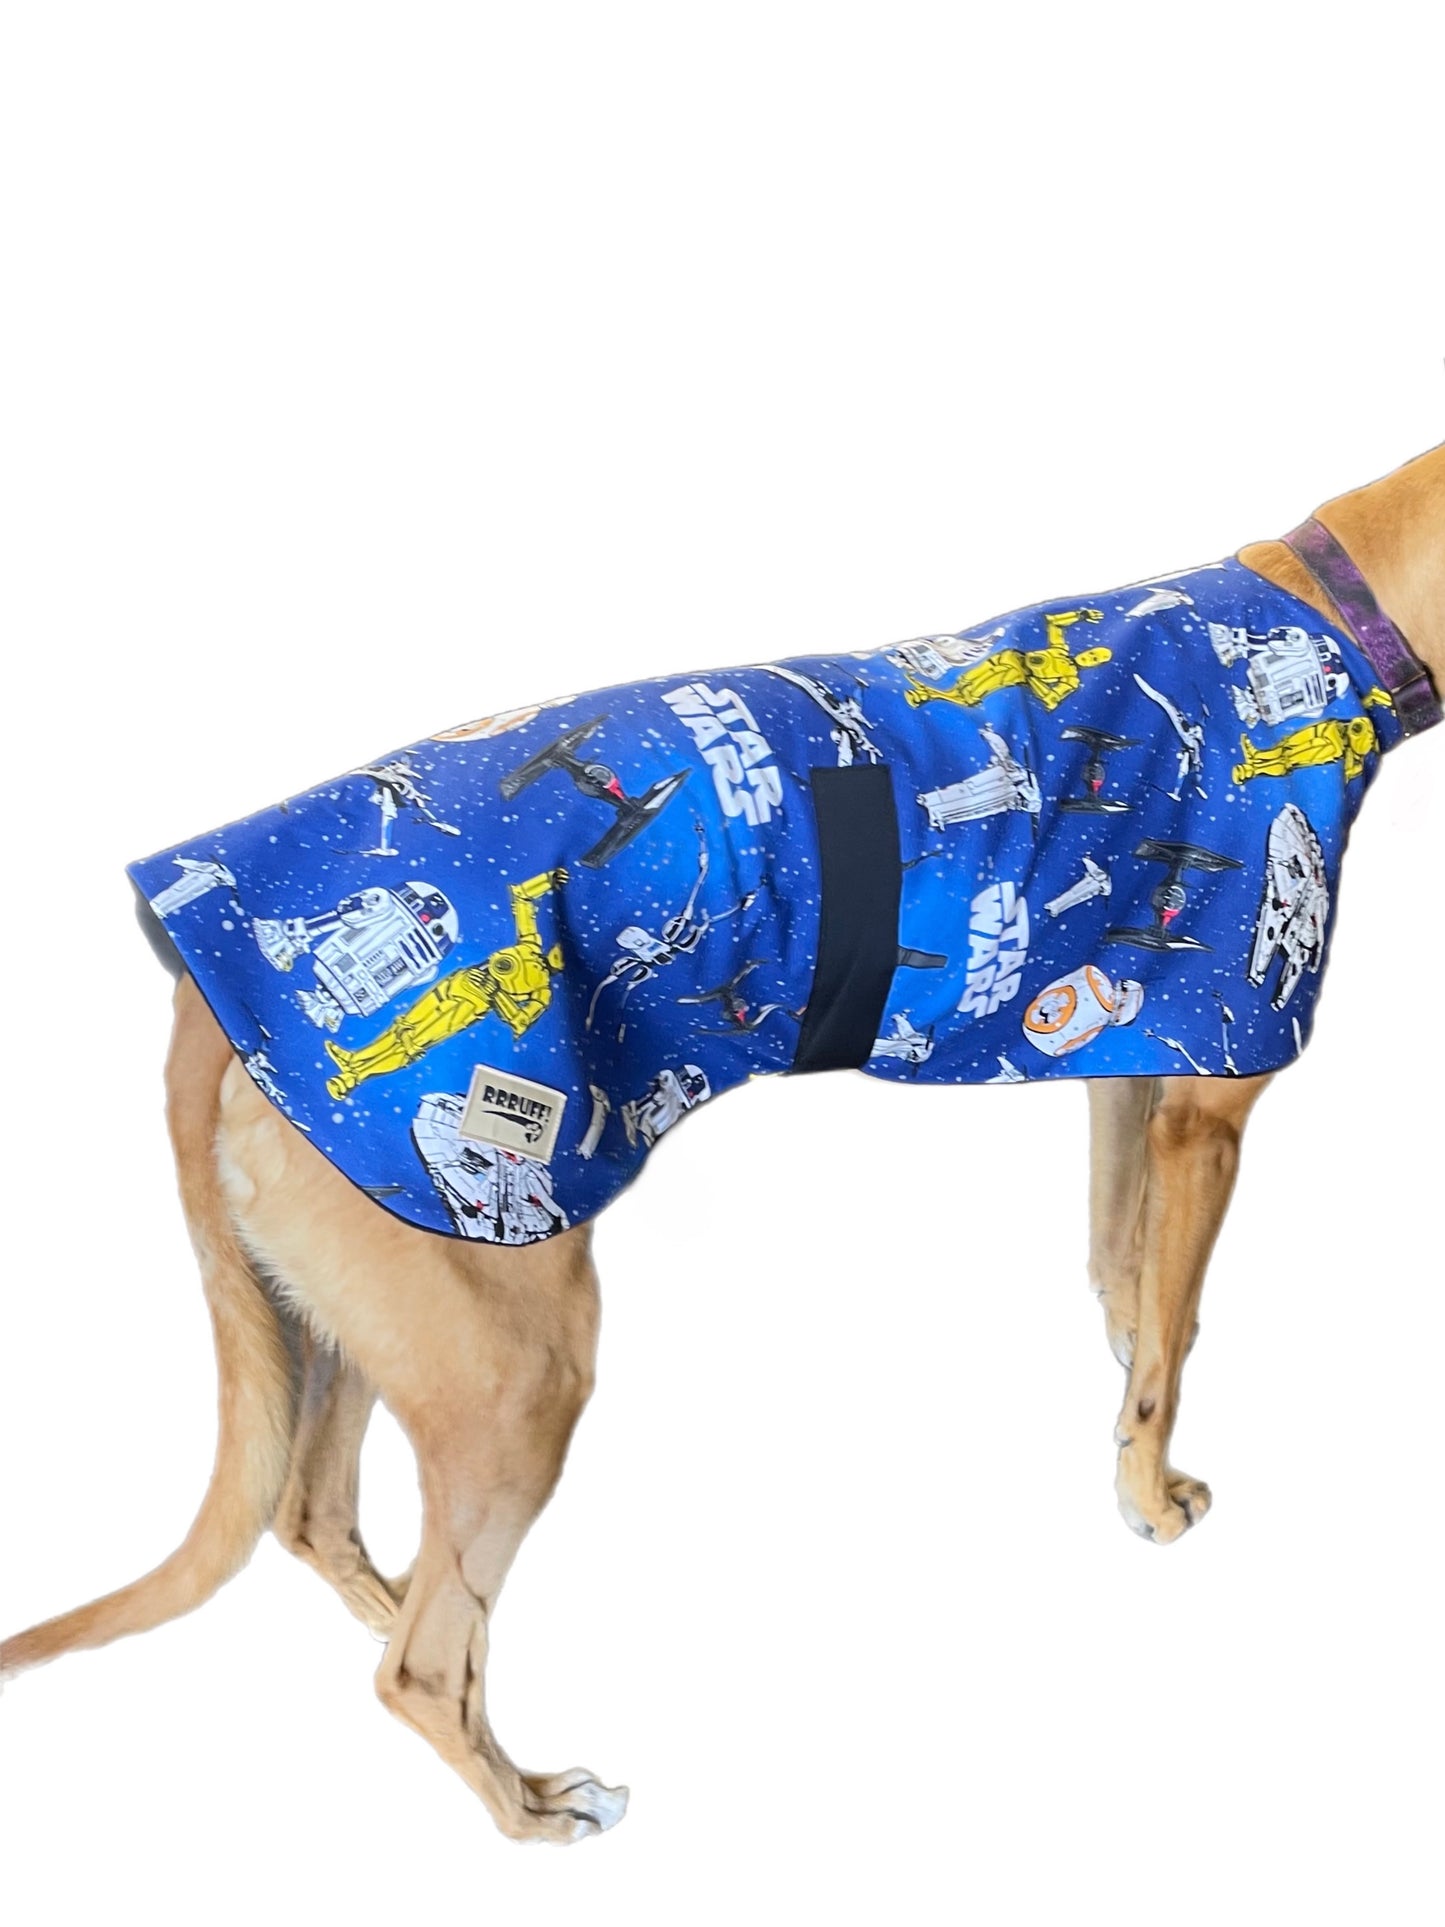 Star Wars Spring classic style Greyhound coat design in a sturdy cotton & lush fleece washable